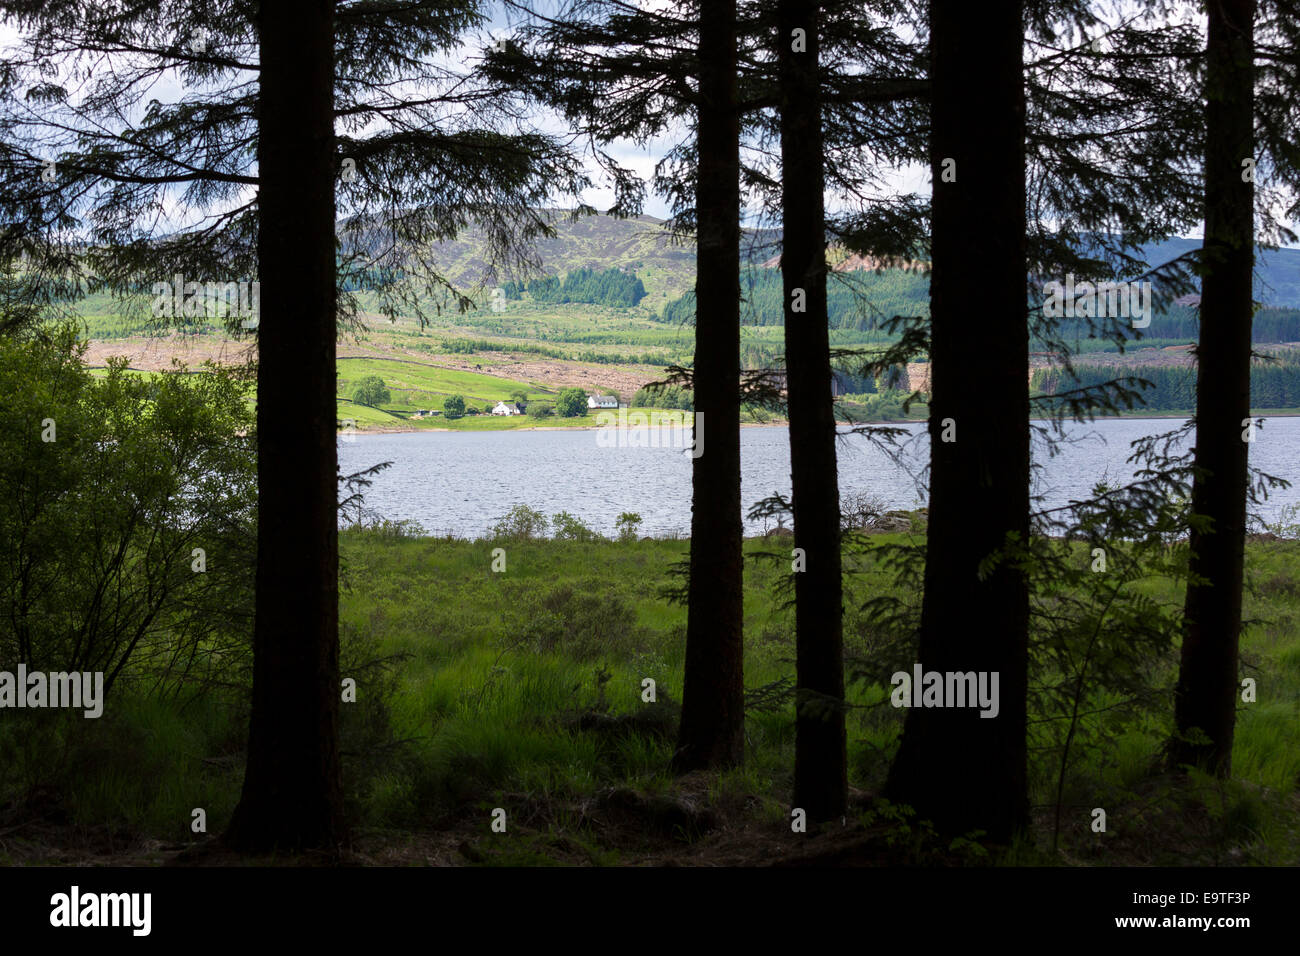 View through larch trees and across the loch to croft cottages in Argyllshire, Western SCOTLAND Stock Photo